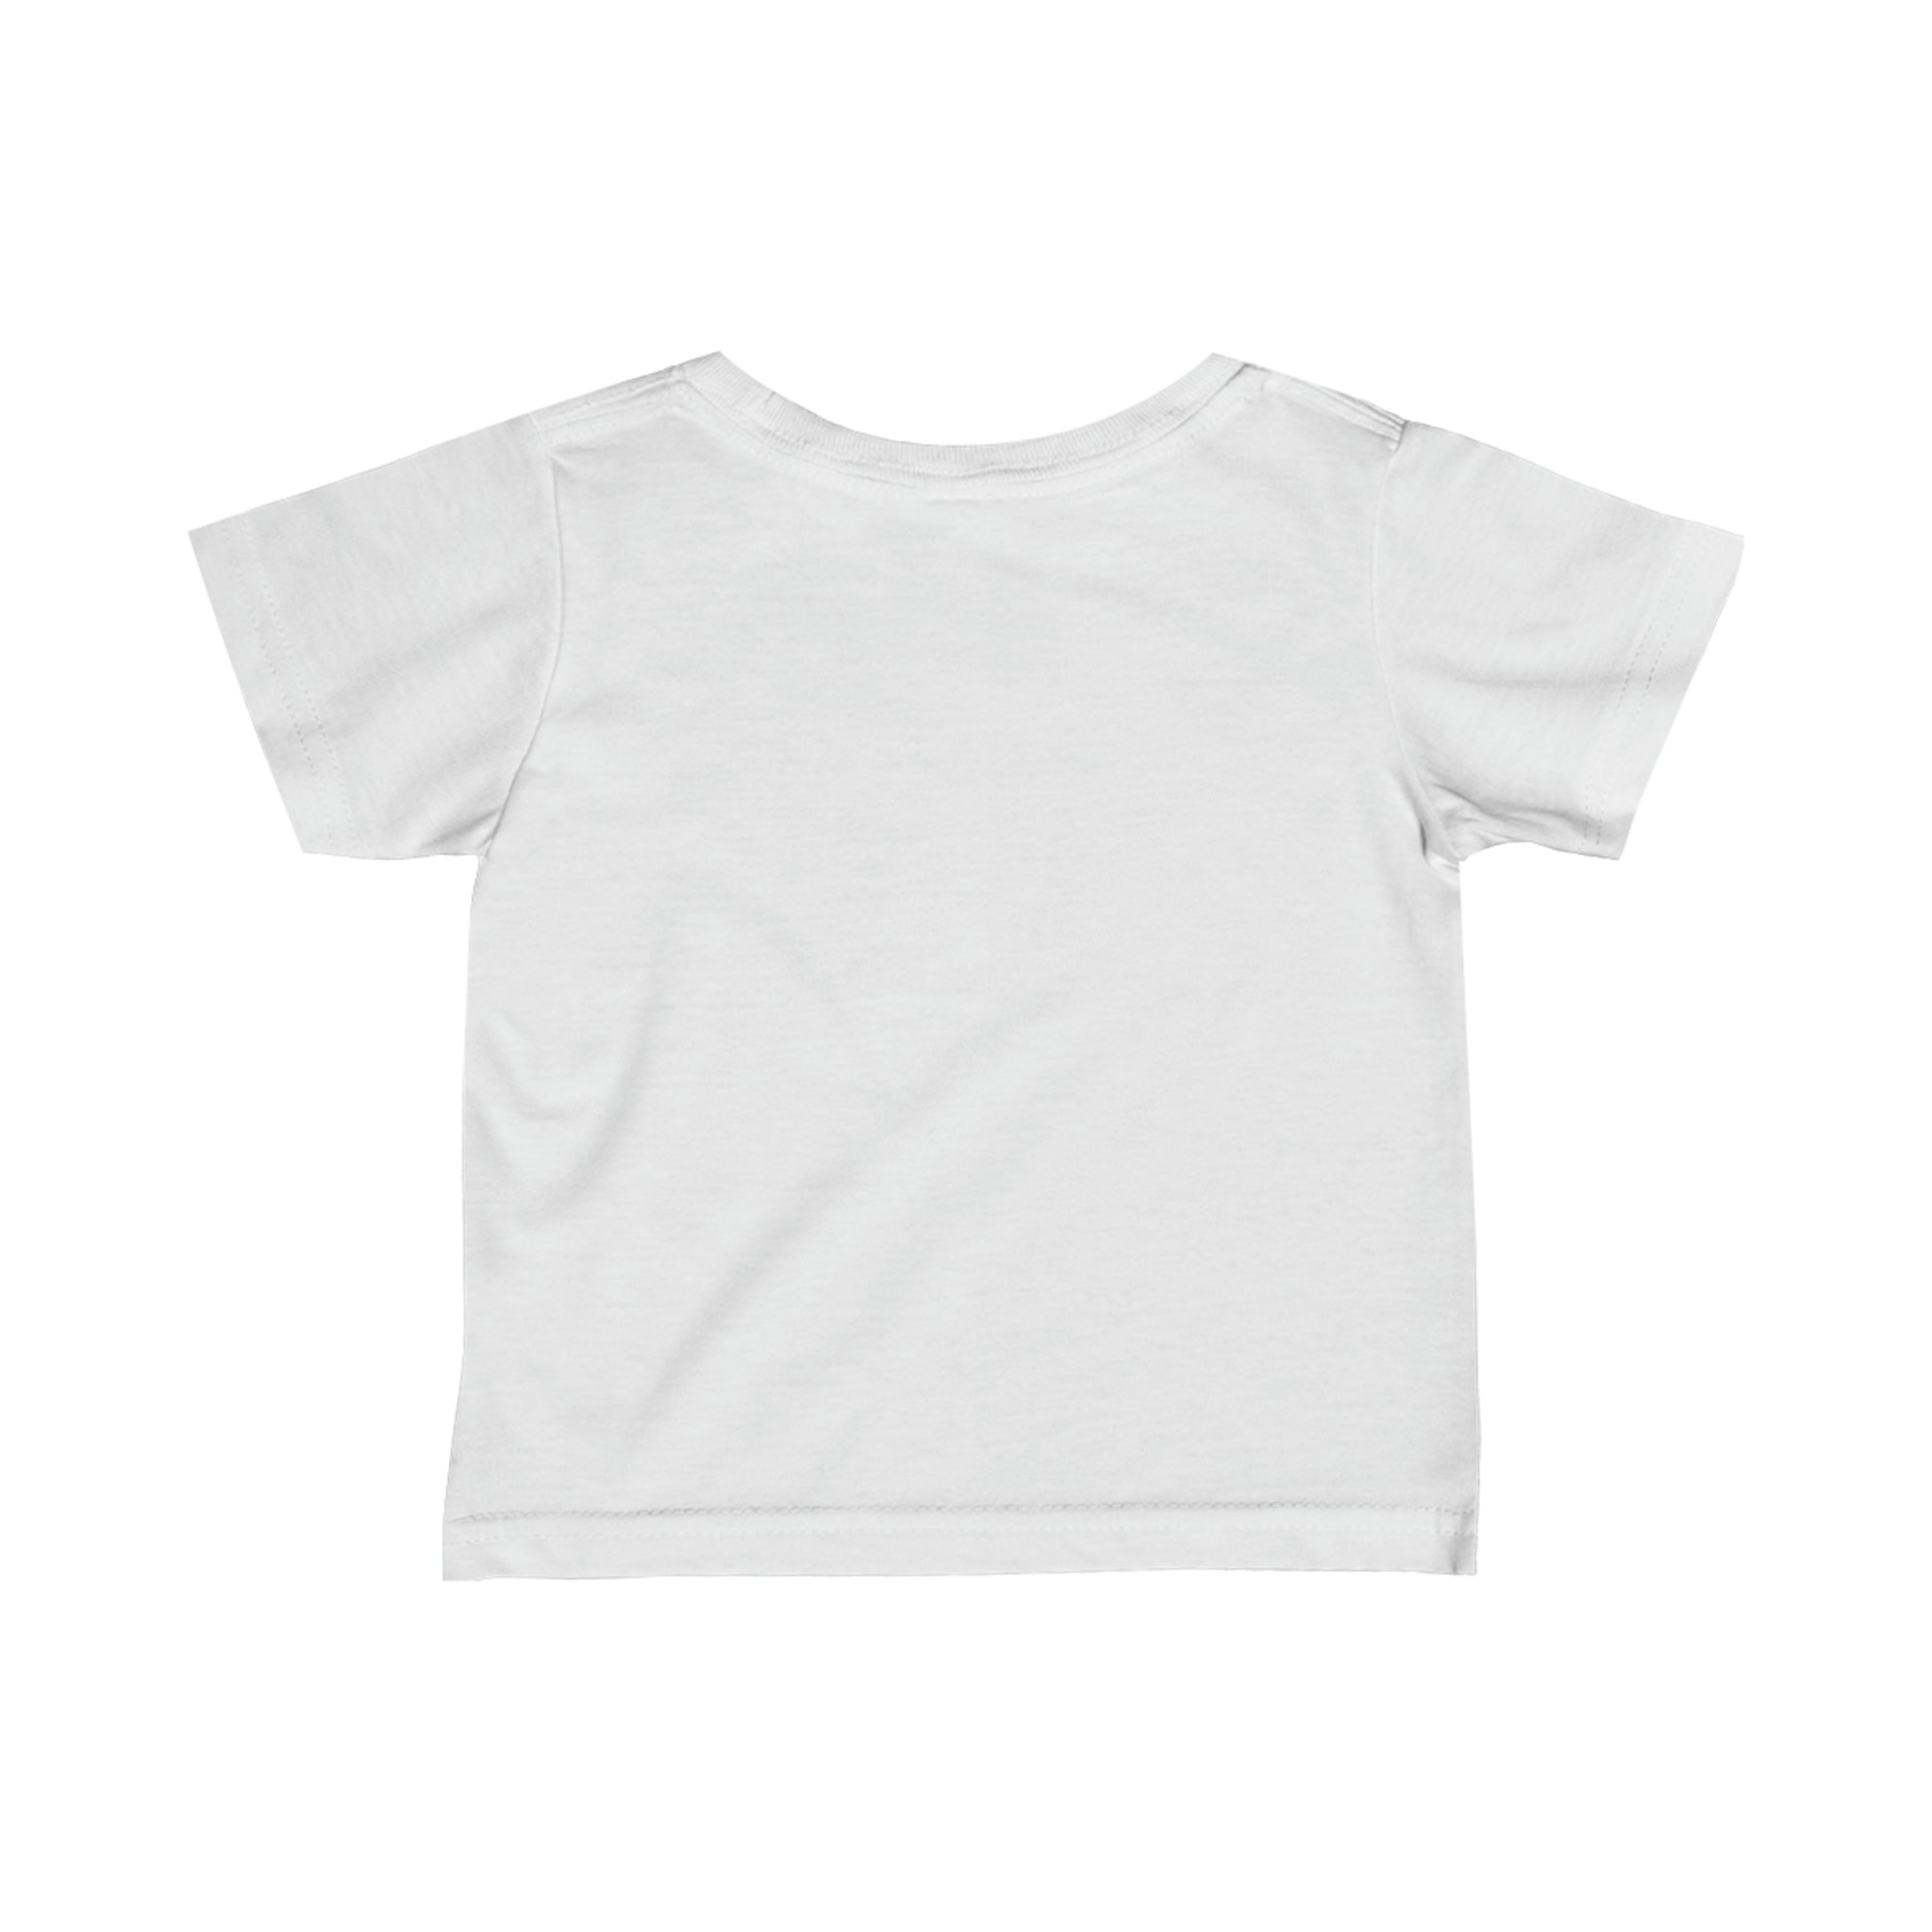 Minerallymade | Nourishing IQs Naturally | Infant Fine Jersey Tee